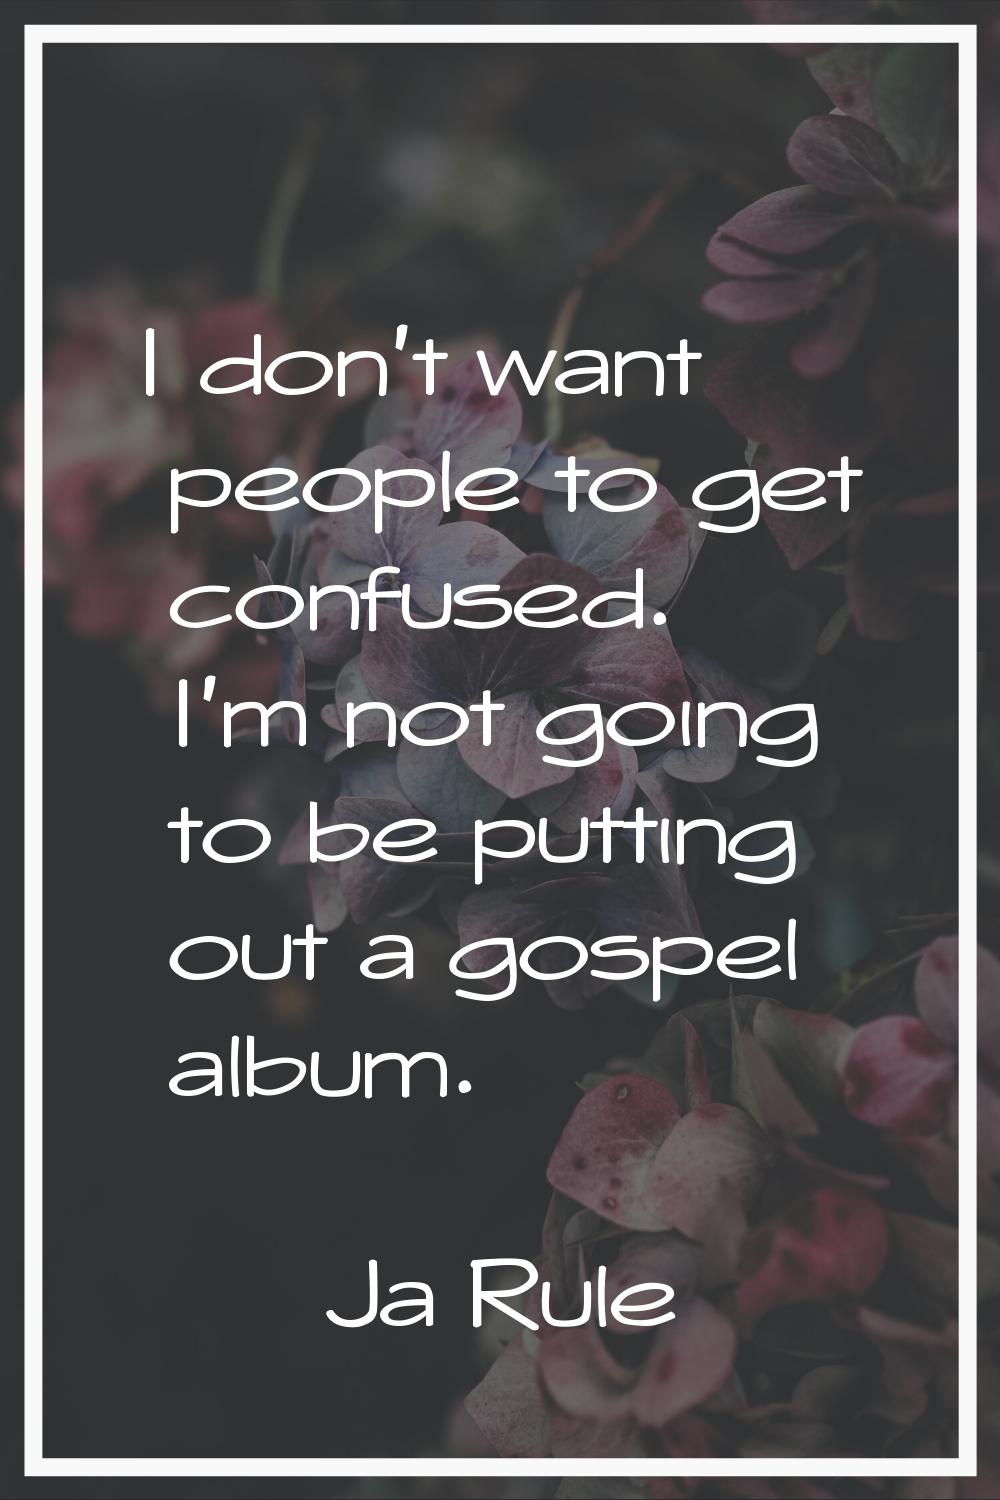 I don't want people to get confused. I'm not going to be putting out a gospel album.